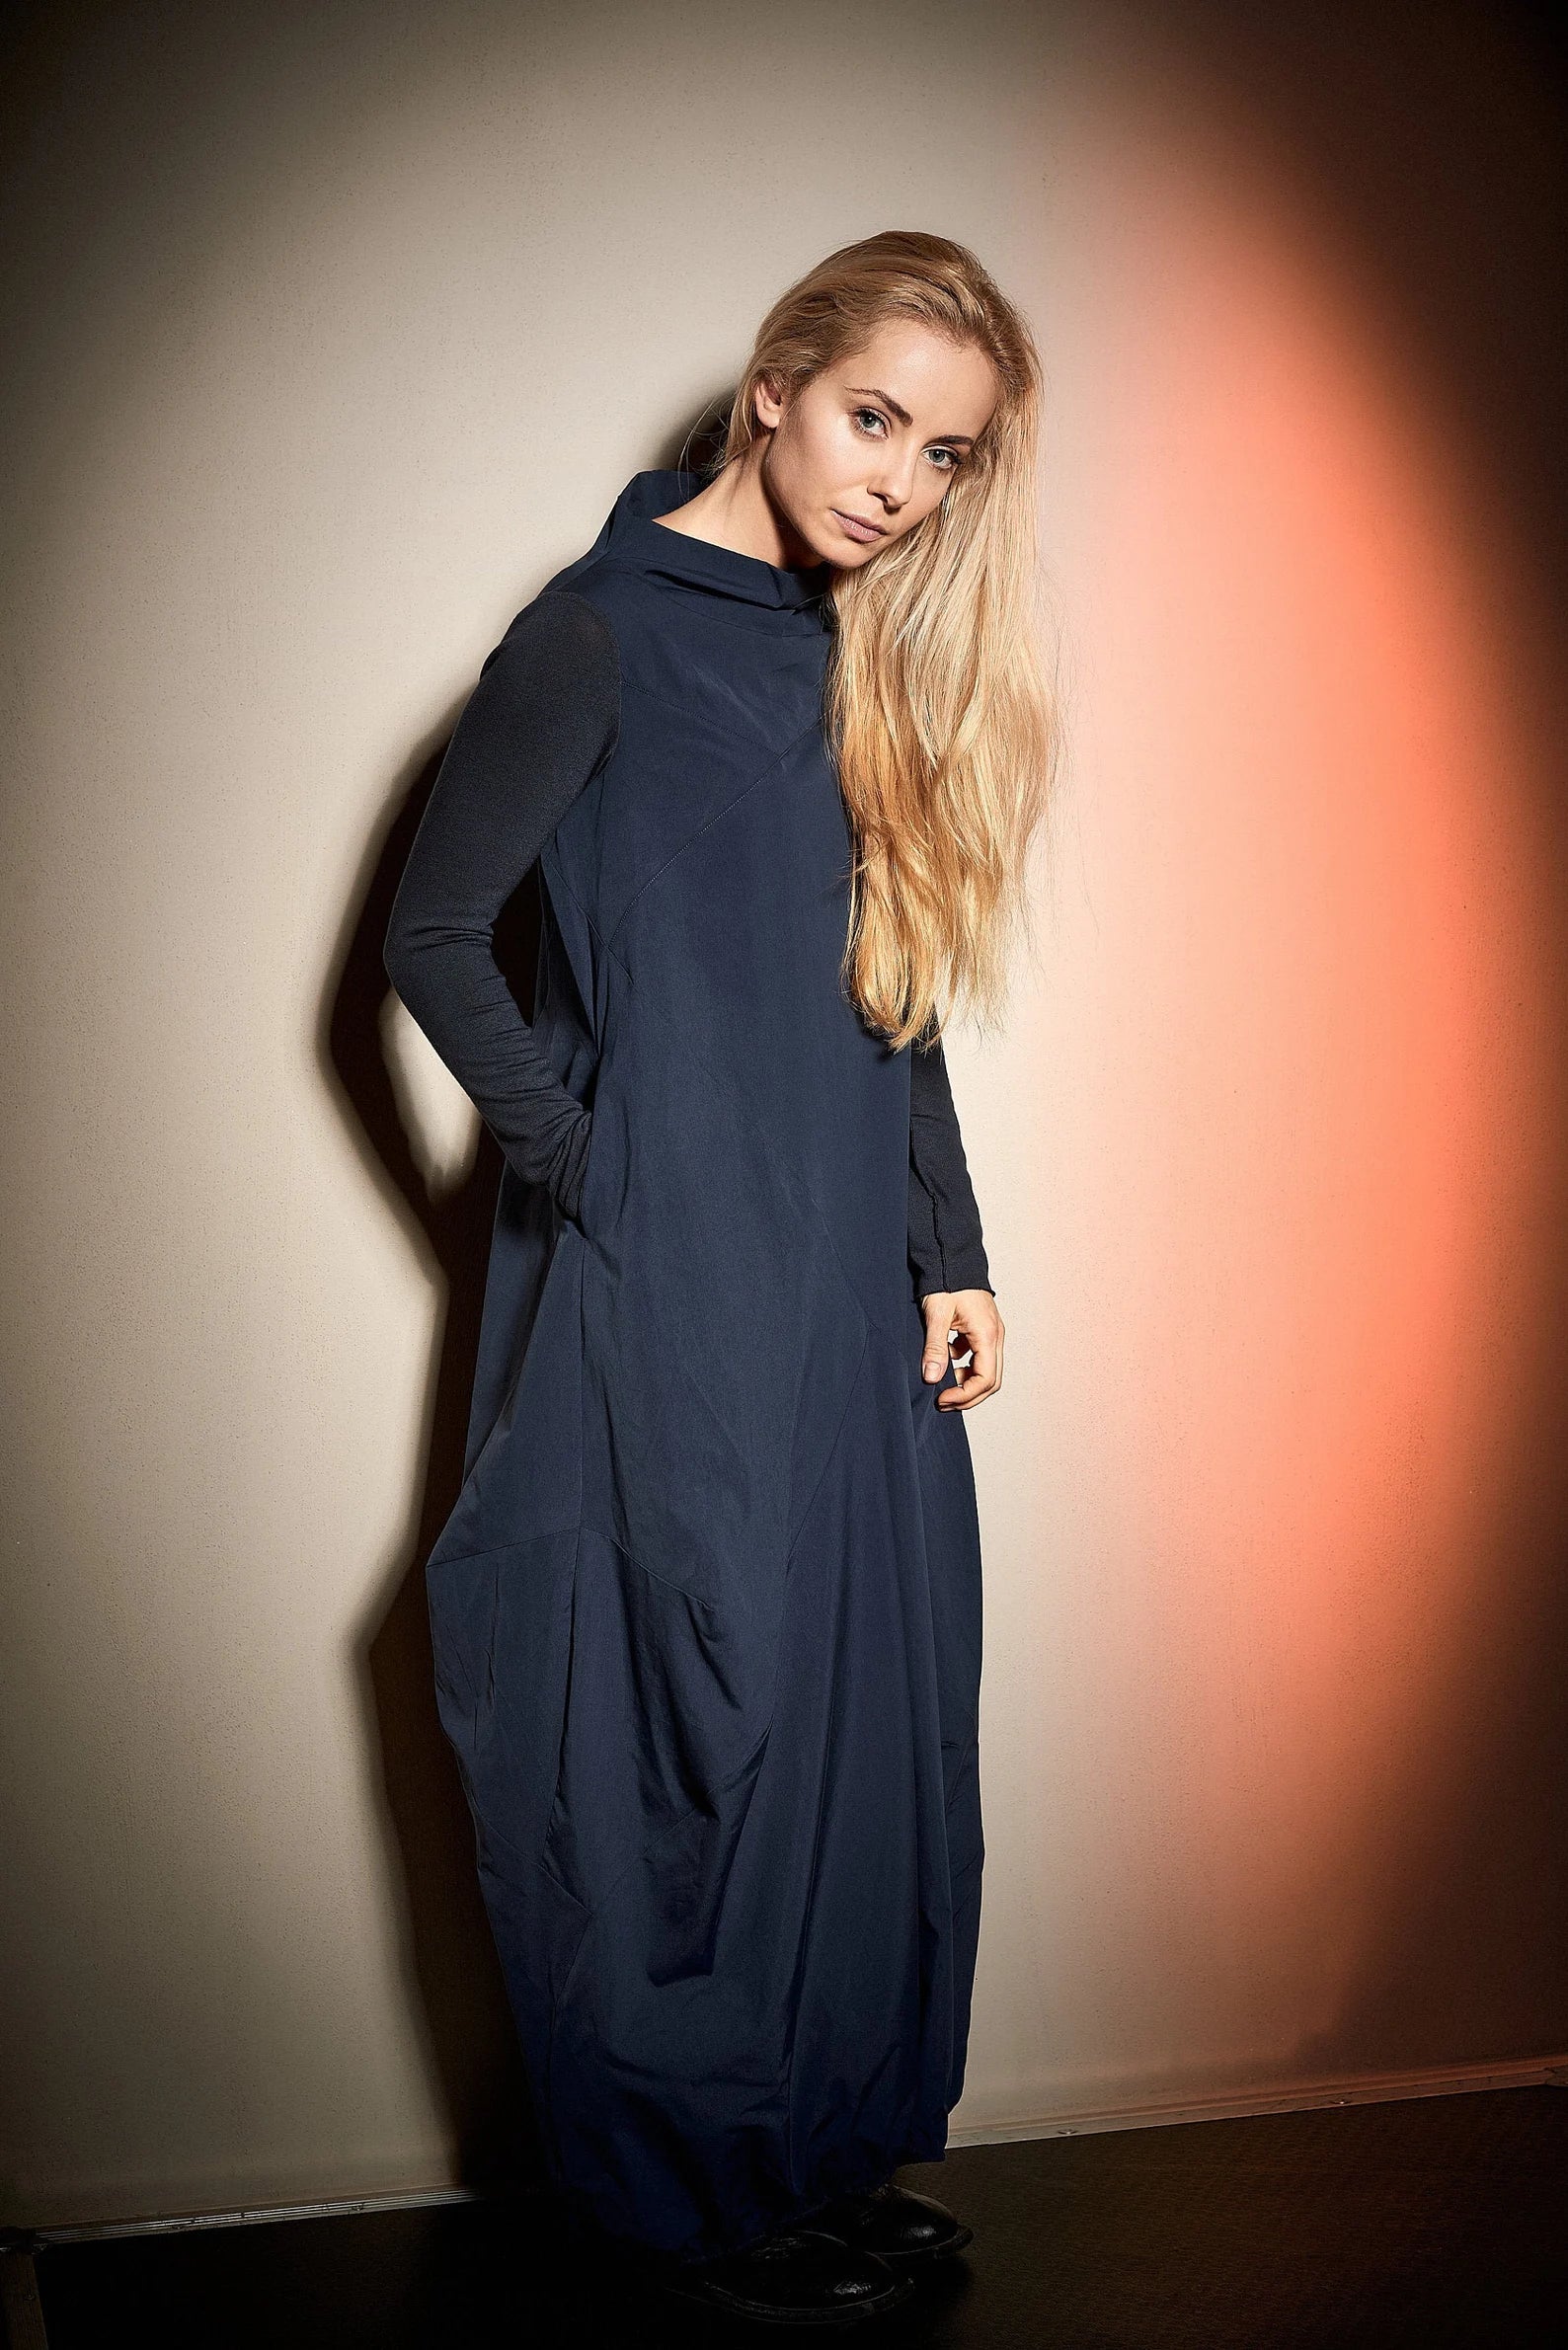 LONG SLEEVED DISTORTED MAXI DRESS